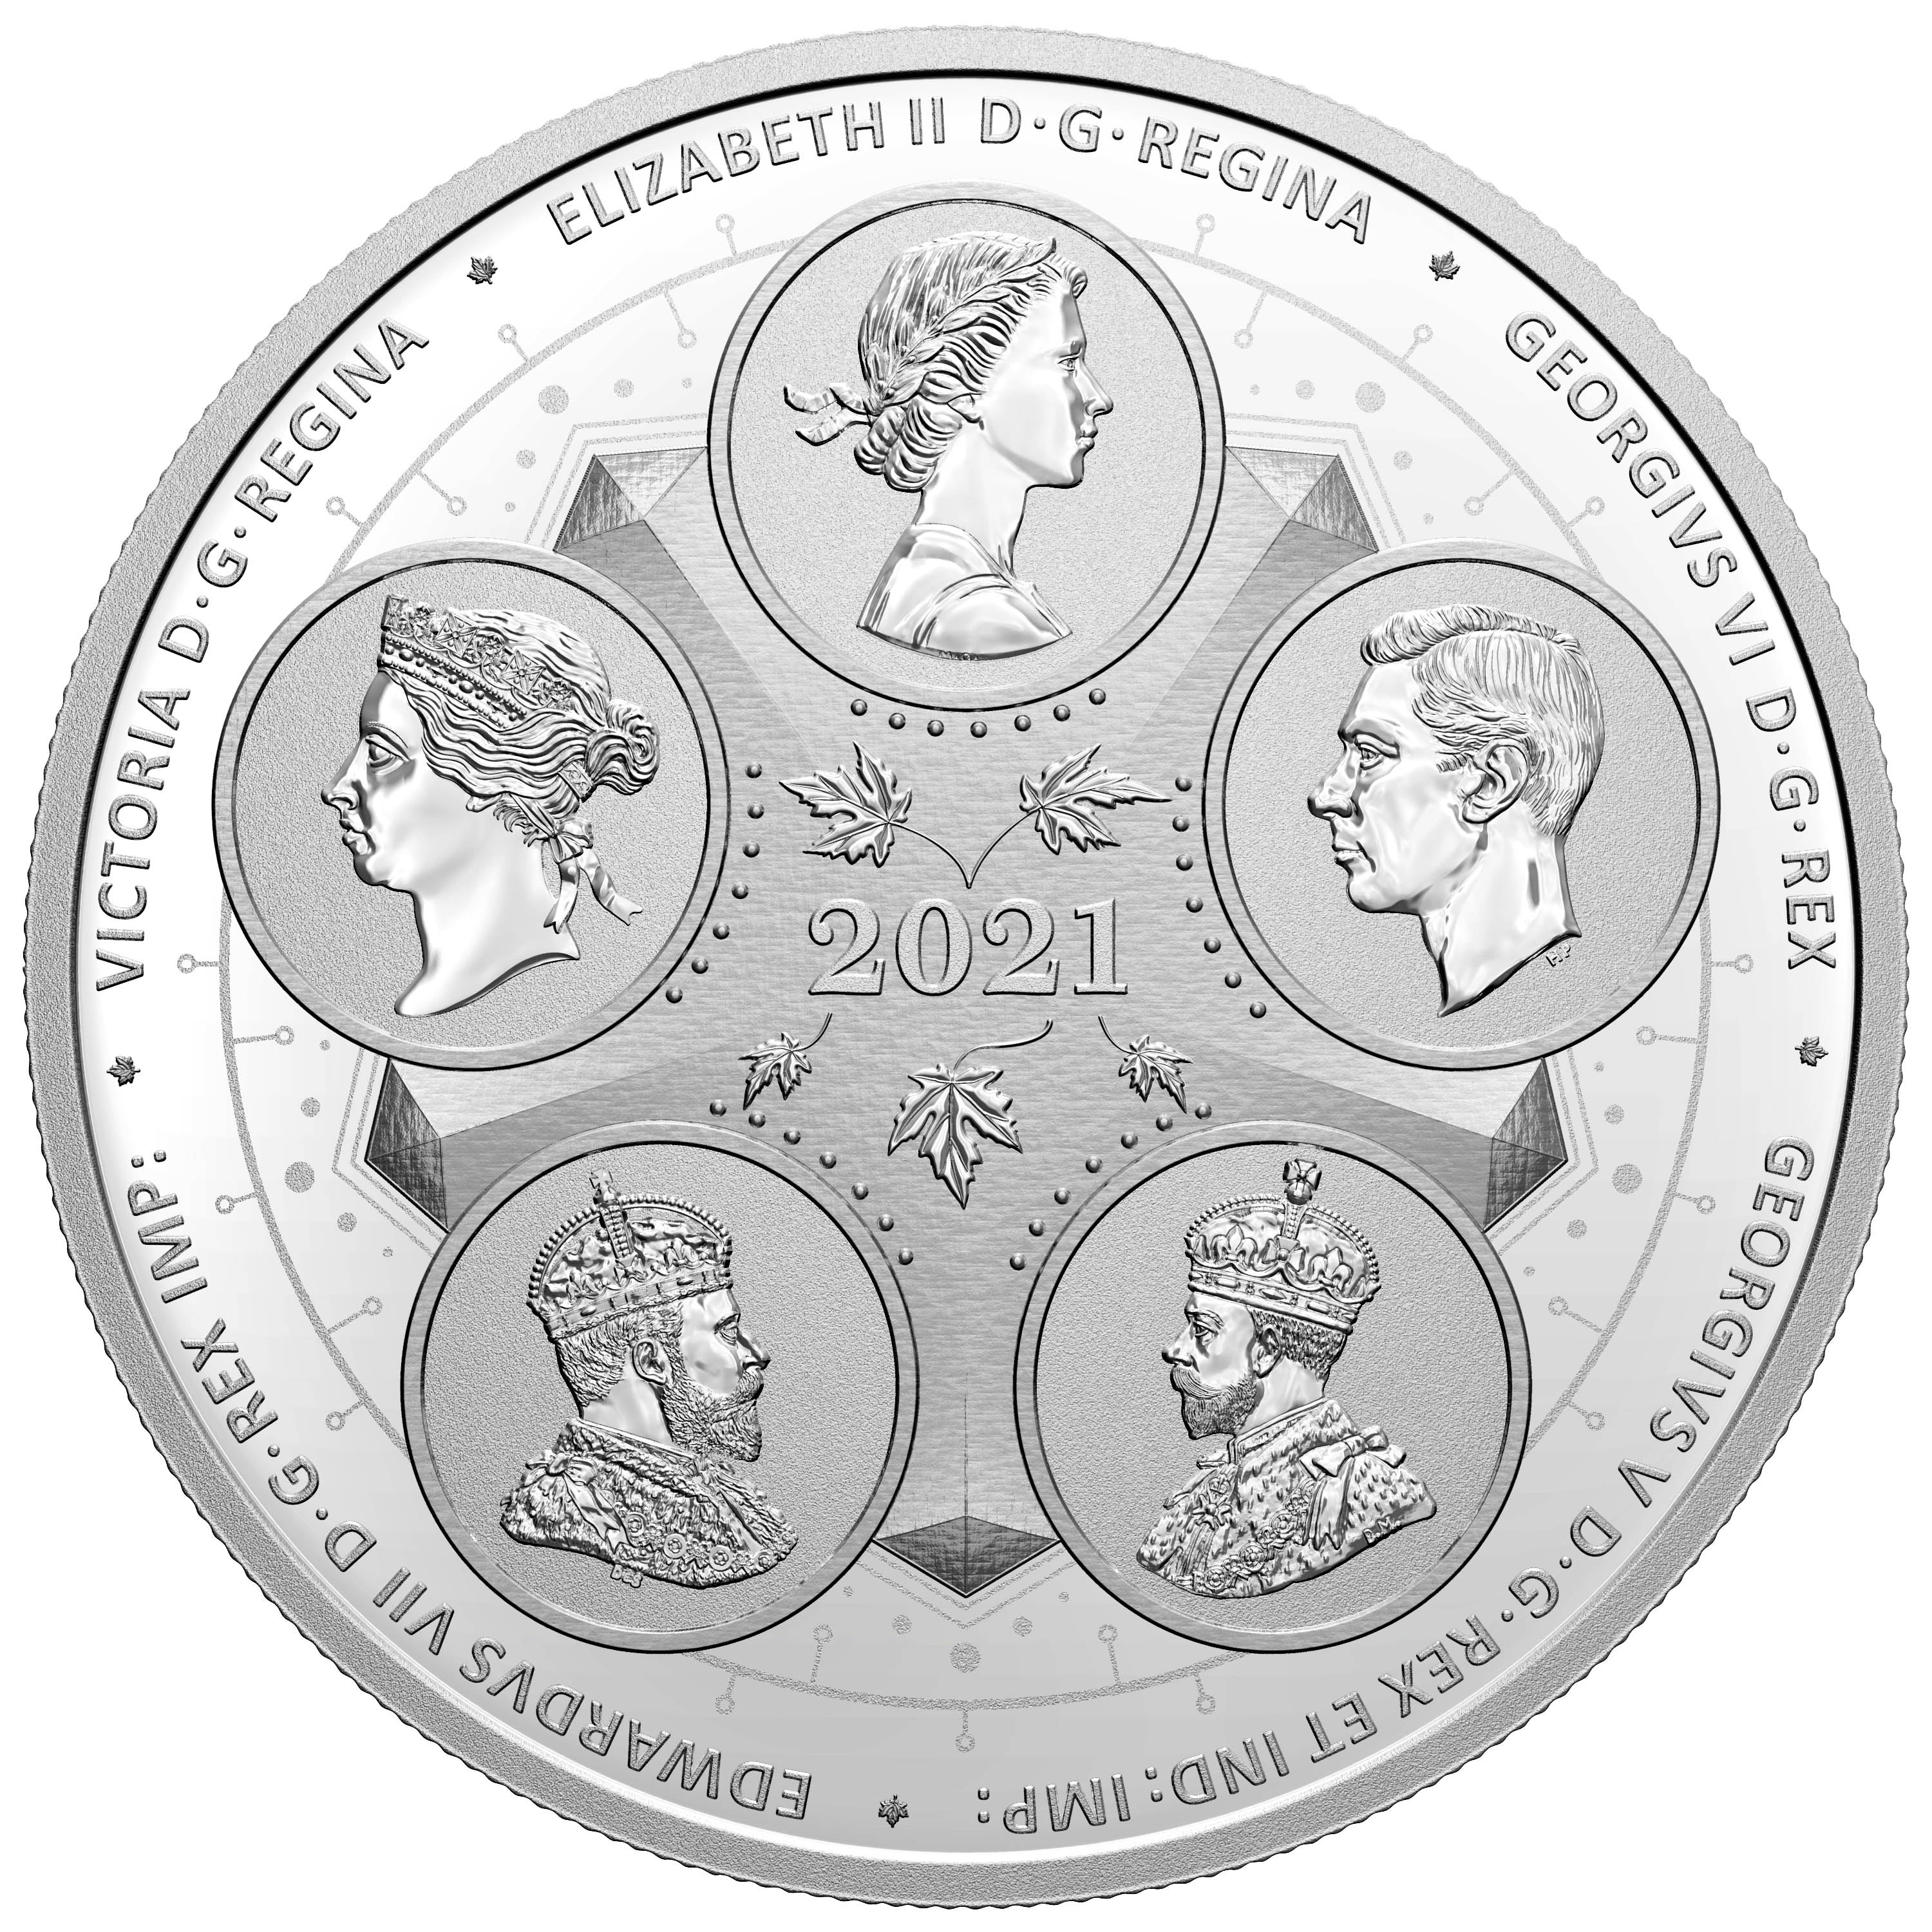 COMING OF AGE First 100 Years of Confederation Boat Silver Coin $50 Canada 2021